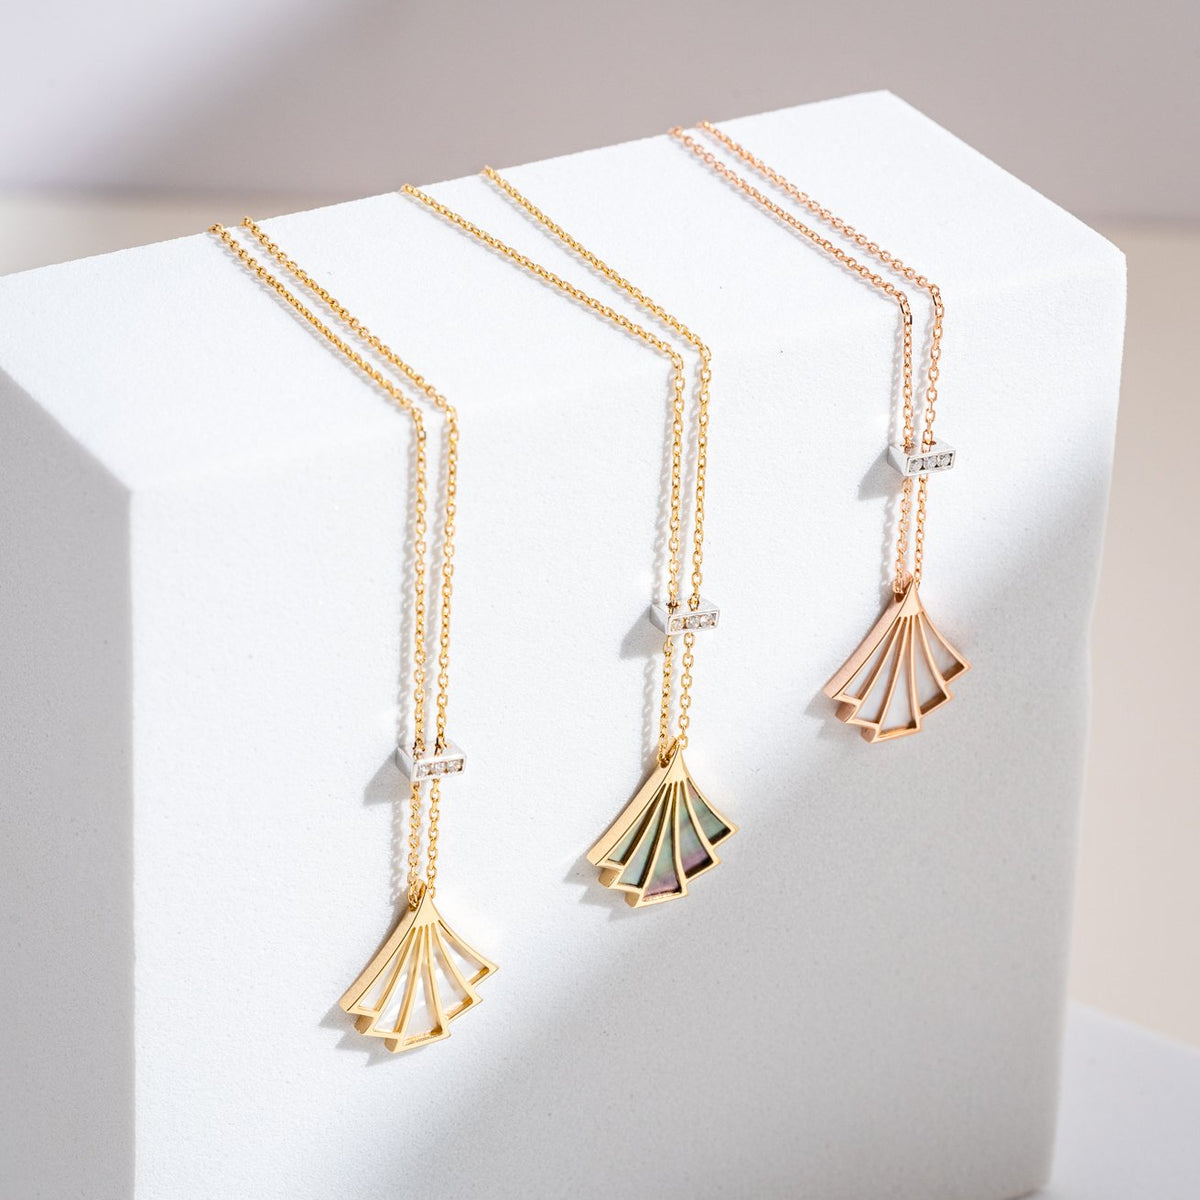 Our Finesse Debut necklaces come in rose and yellow gold with diamonds and natural mother of pearl